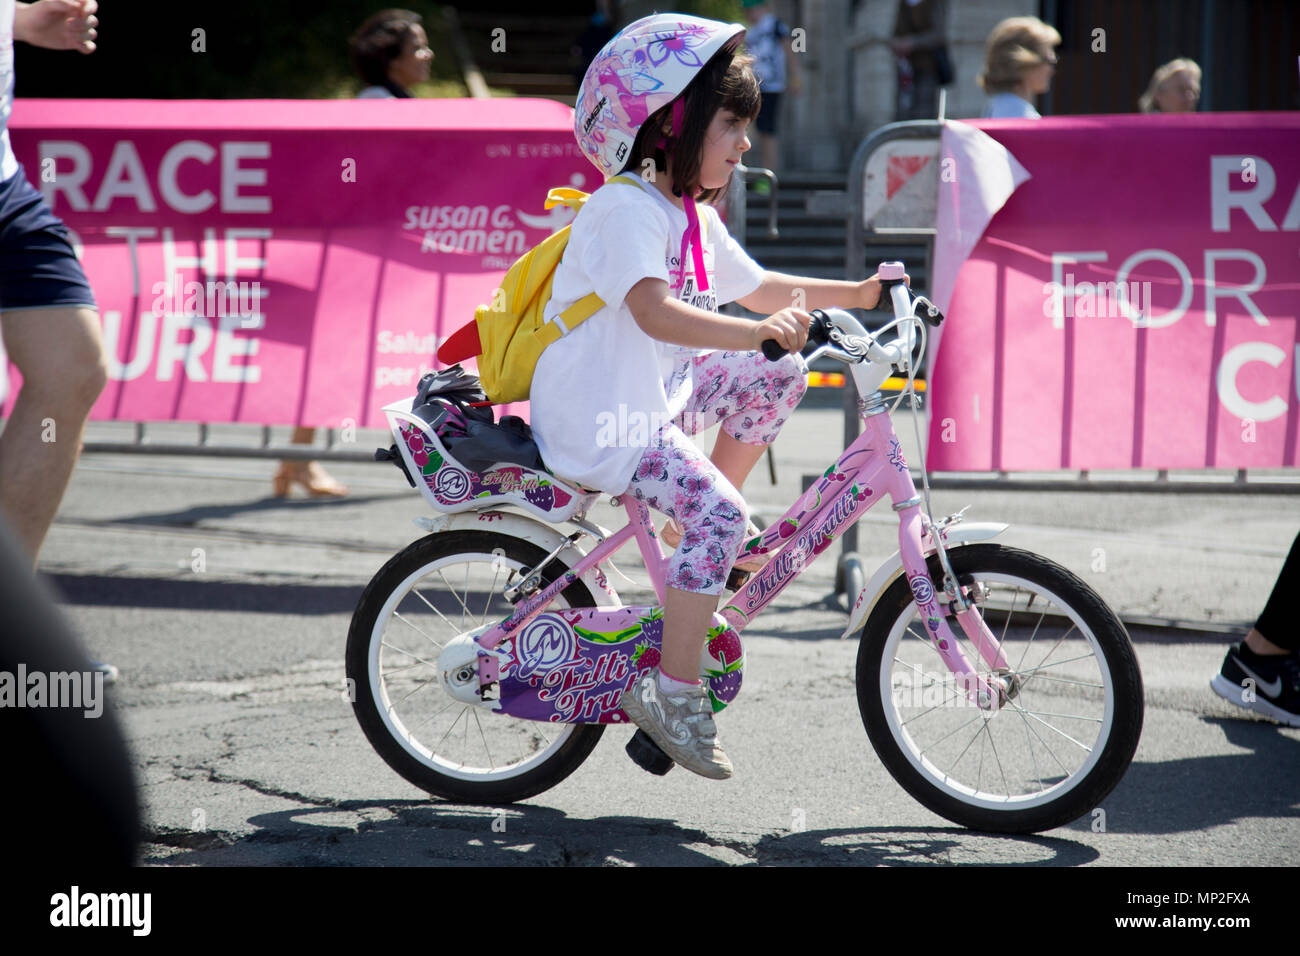 Rome, Italy. 20th May, 2018. The pink marathon in favor of cancer research organized by Susan G. Komen has invaded the streets of Rome. The godmothers of the event the actresses Maria Grazia Cucinotta and Rosanna Banfi. Guests of the event, the mayor of Rome Virginia Raggi, the president of Regione Lazio Nicola Zingaretti, the president of Coni Giovanni Malagò. Credit: Stefano Cappa/Pacific Press/Alamy Live News Stock Photo